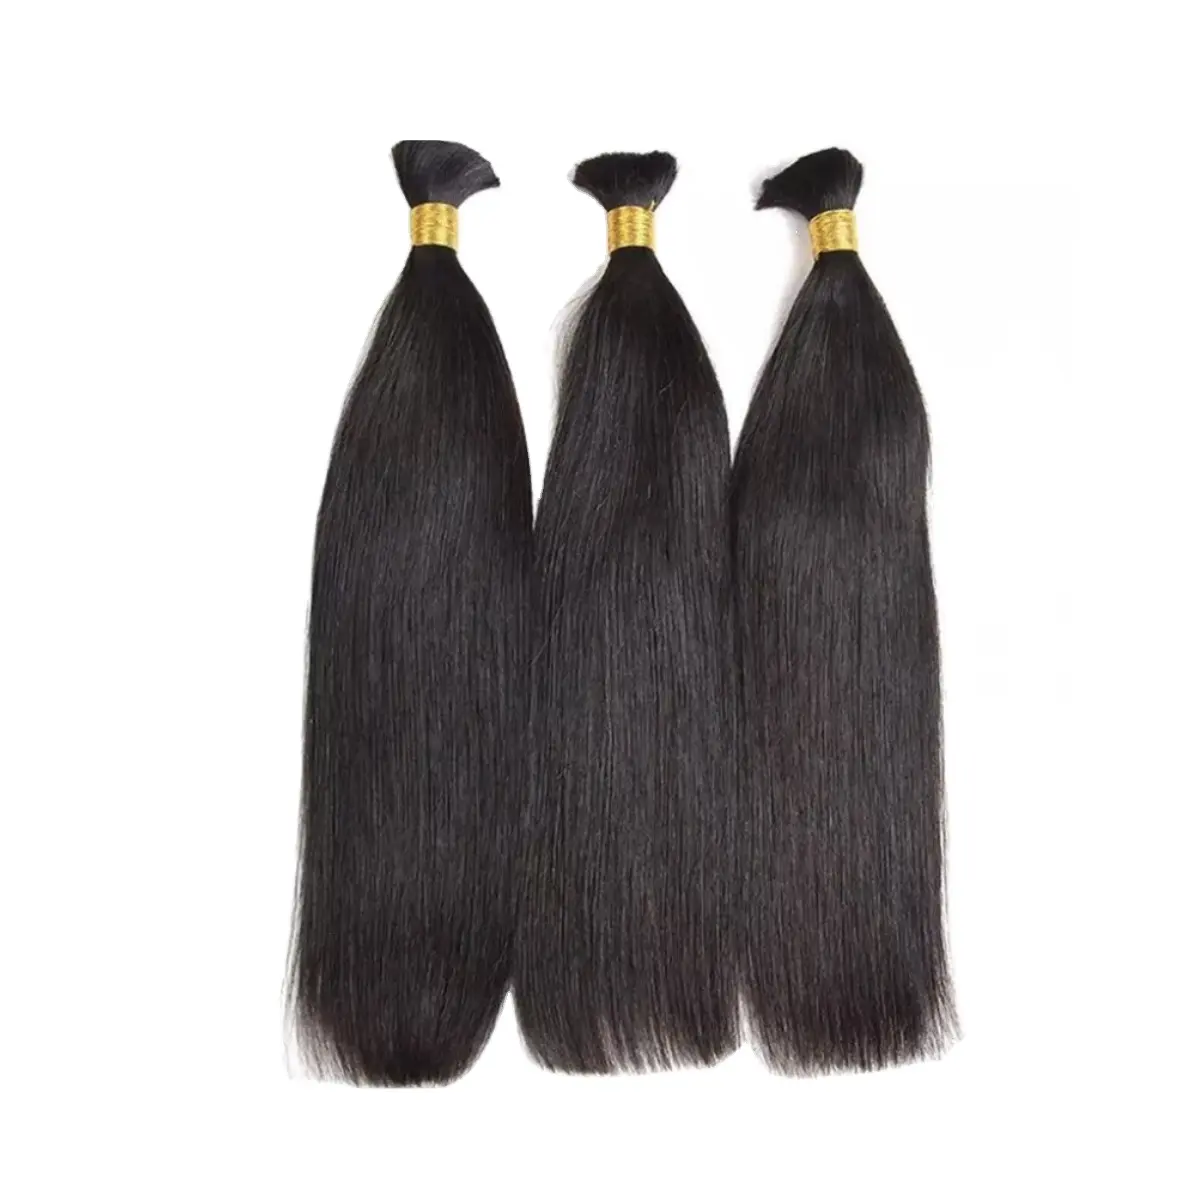 55cm Length Raw Vietnamese Hair Straight Bulk Human Hair Extension Good for Wholesalers with best quality remarkable price